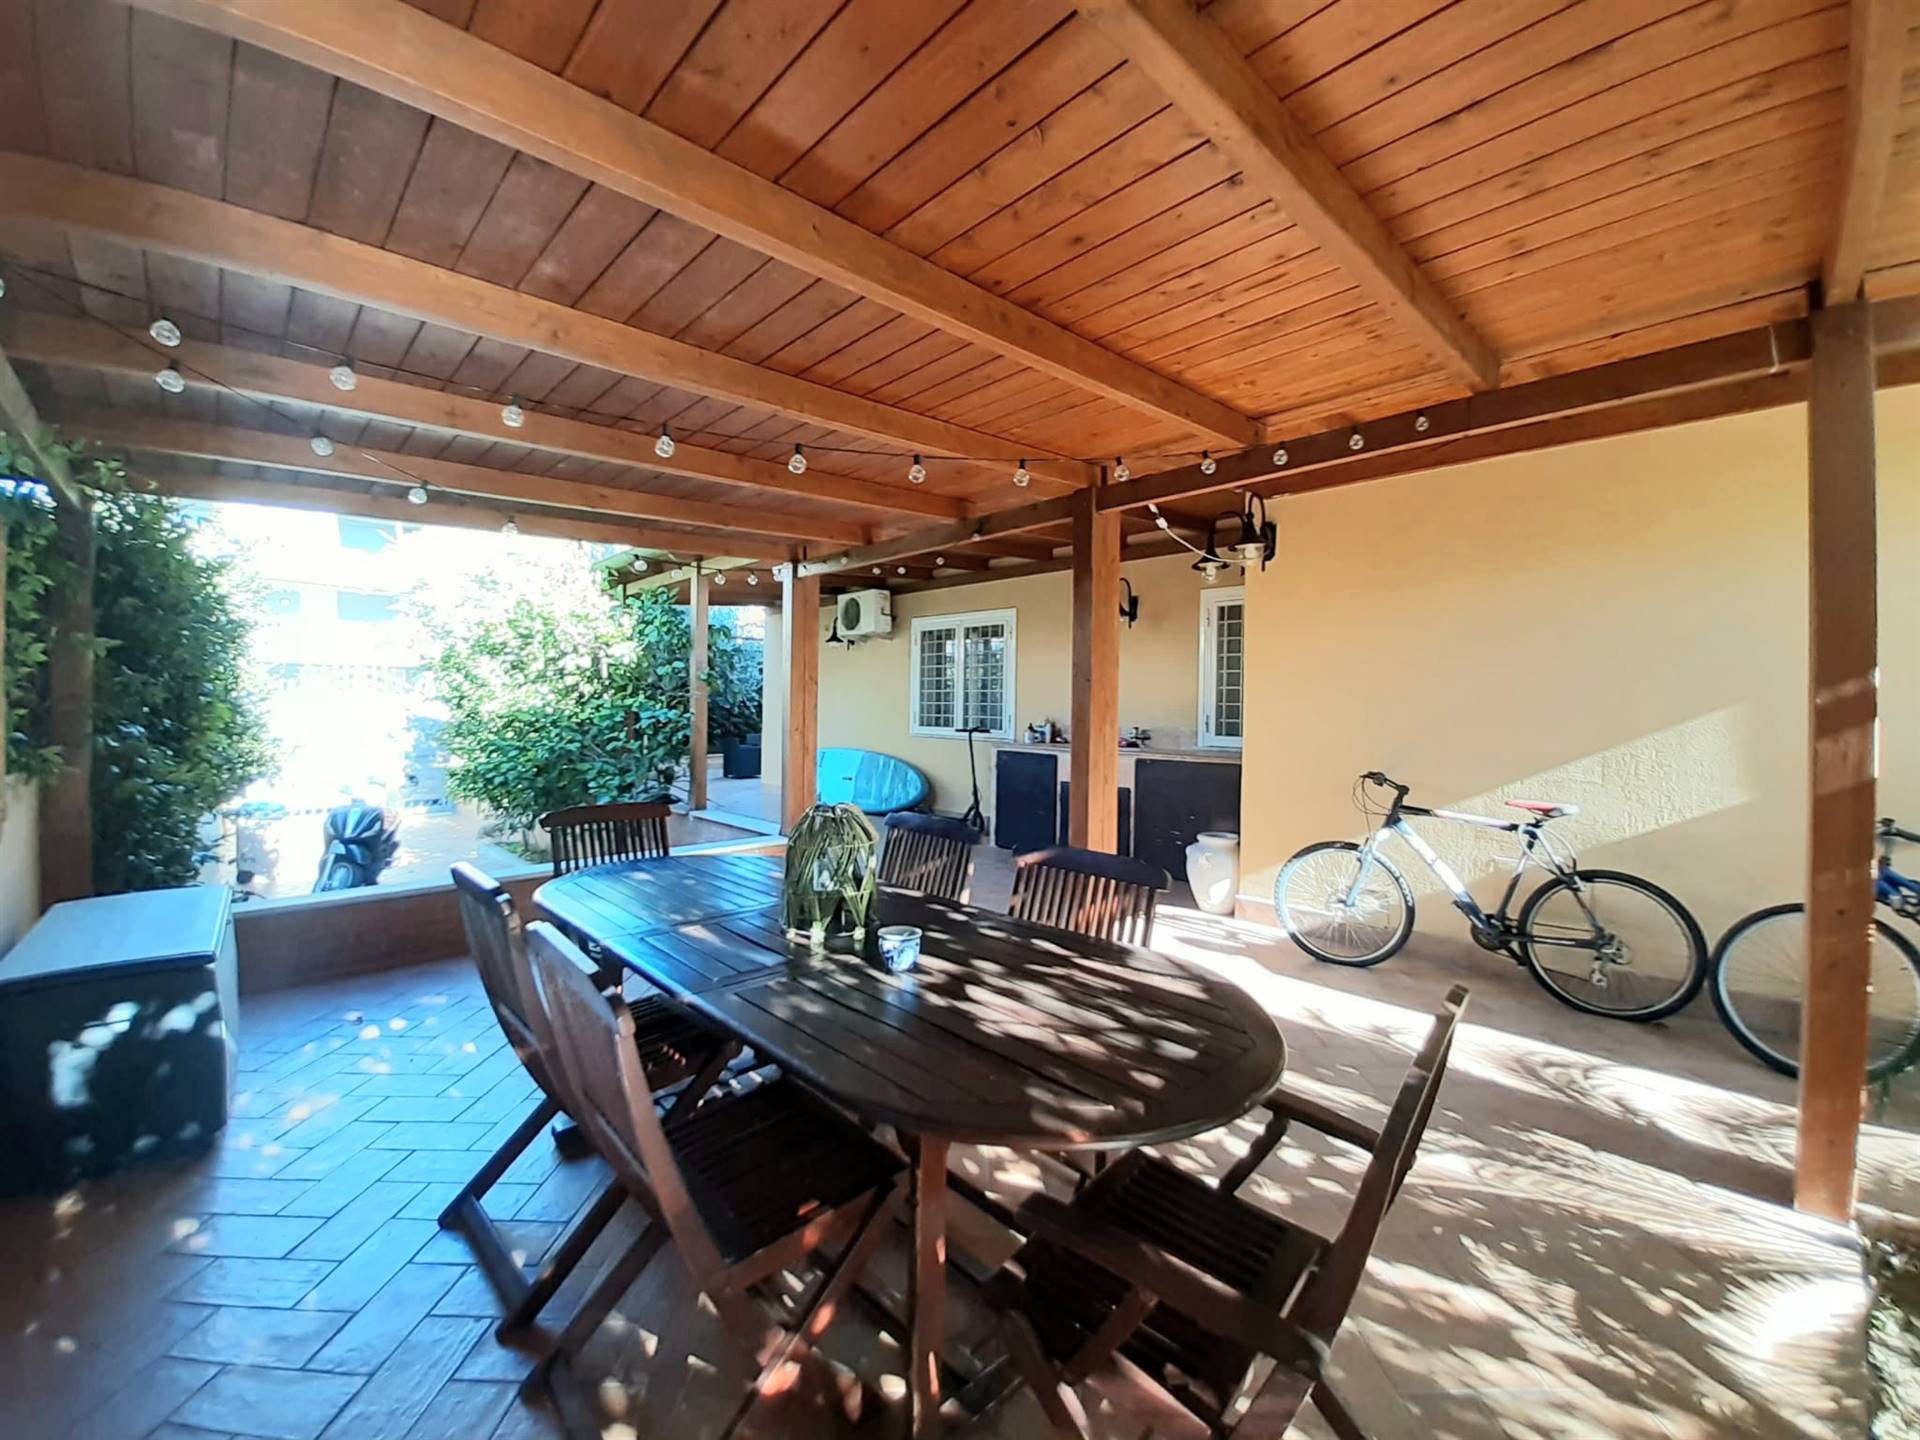 SANTA MARINELLA, Detached apartment for sale of 70 Sq. mt., Excellent Condition, Heating Individual heating system, Energetic class: G, Epi: 175 kwh/m2 year, placed at Raised on 3, composed by: 3 